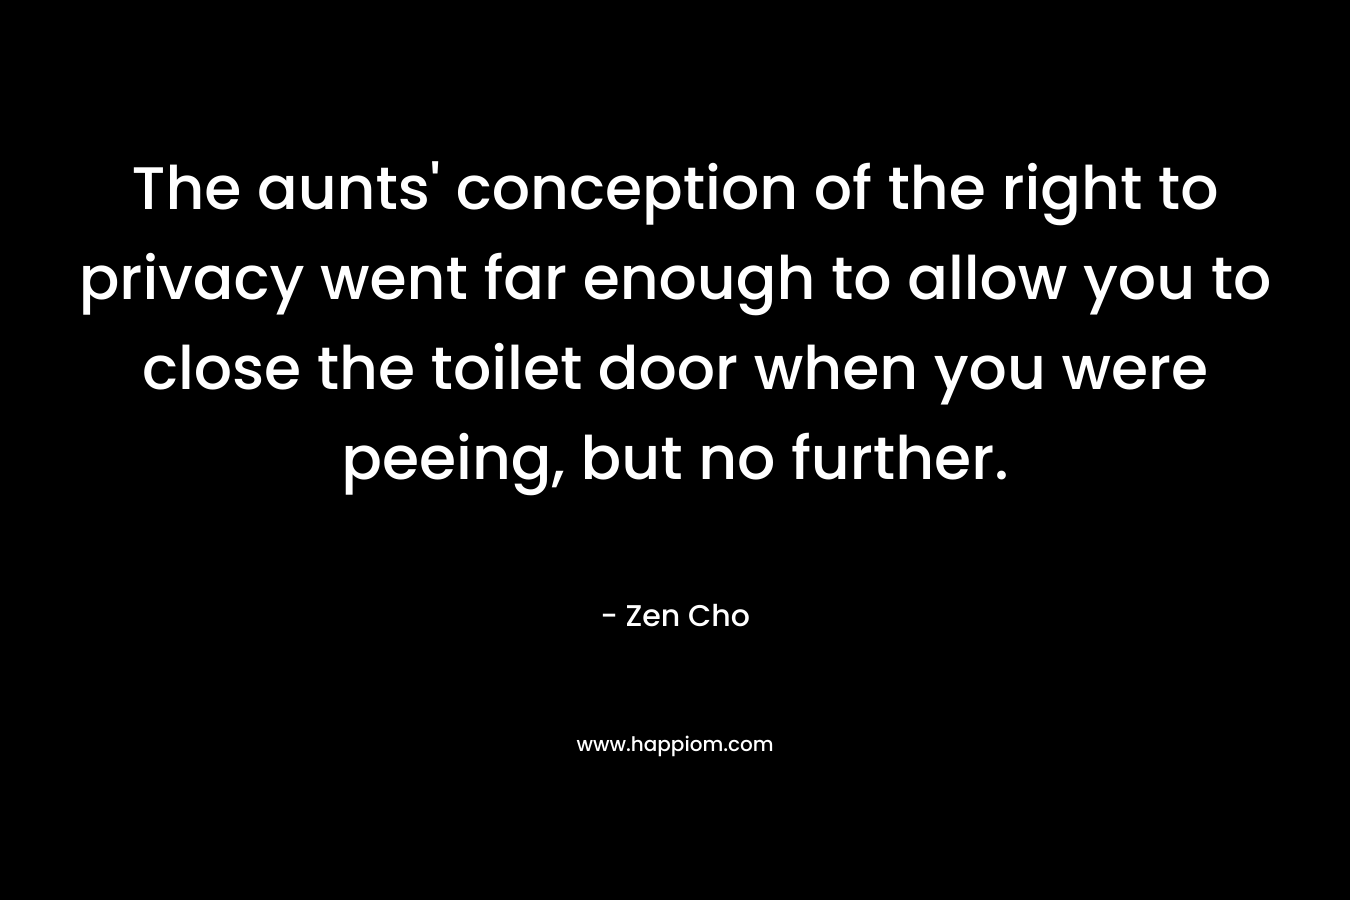 The aunts’ conception of the right to privacy went far enough to allow you to close the toilet door when you were peeing, but no further. – Zen Cho